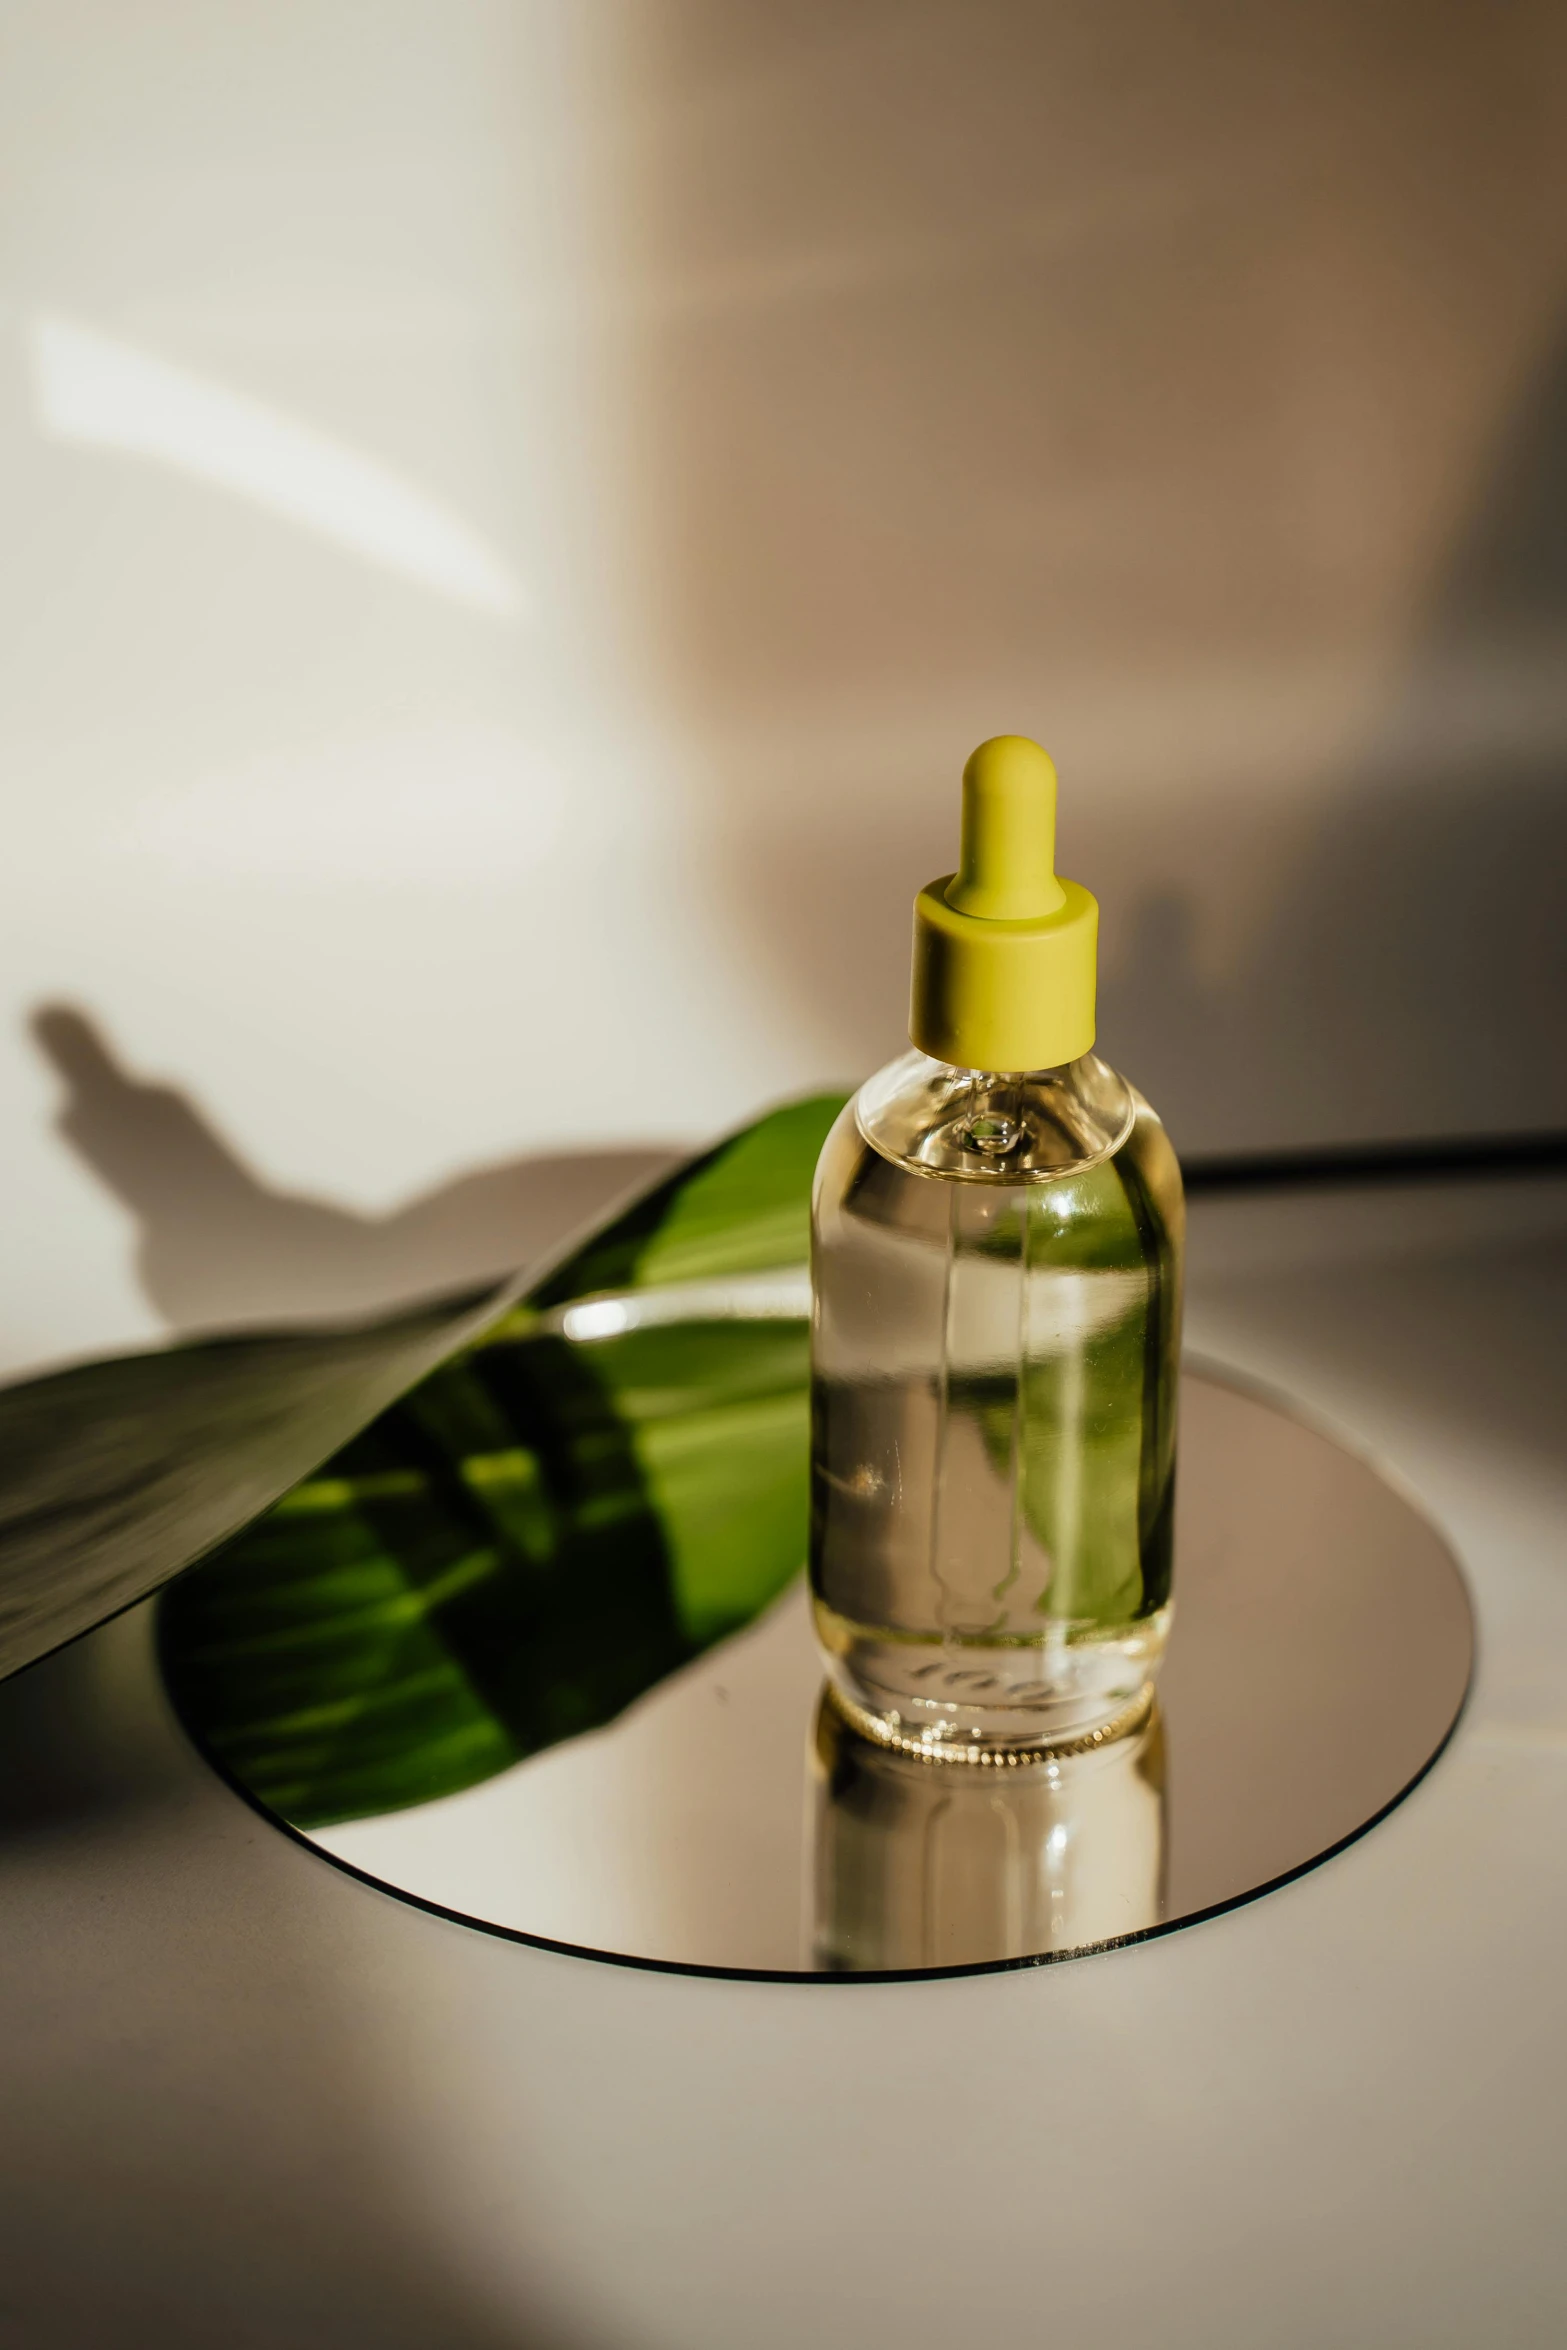 a bottle of liquid sitting on top of a table, by Julia Pishtar, skin care, manicured solarpunk greenery, glossy yellow, colour photograph